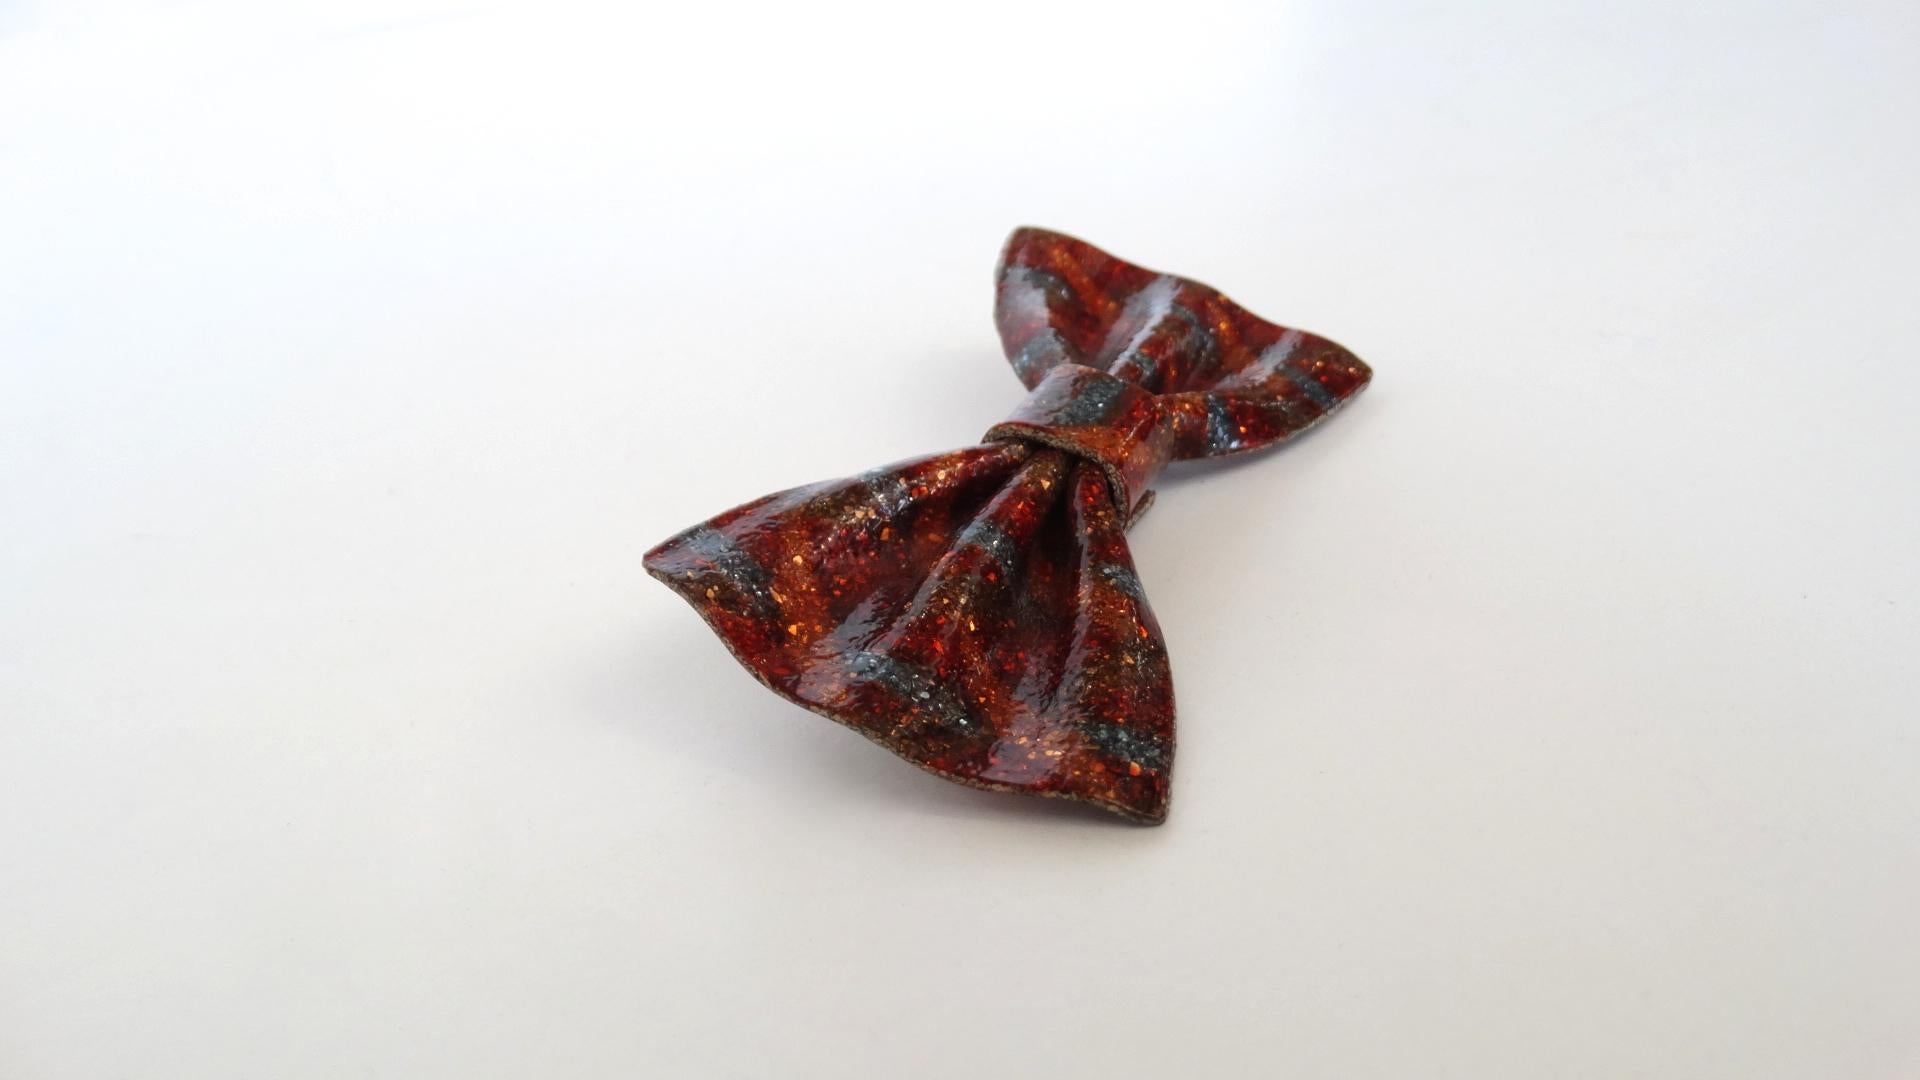 Brooches Are The New Hot Accessory This Season And We've Got You Covered! Circa 1970's, this Lea Stein bow tie brooch features a gorgeous glitter flake effect in burgundy, orange and a cool blue/grey. Shaped into the perfect structured bow tie, this